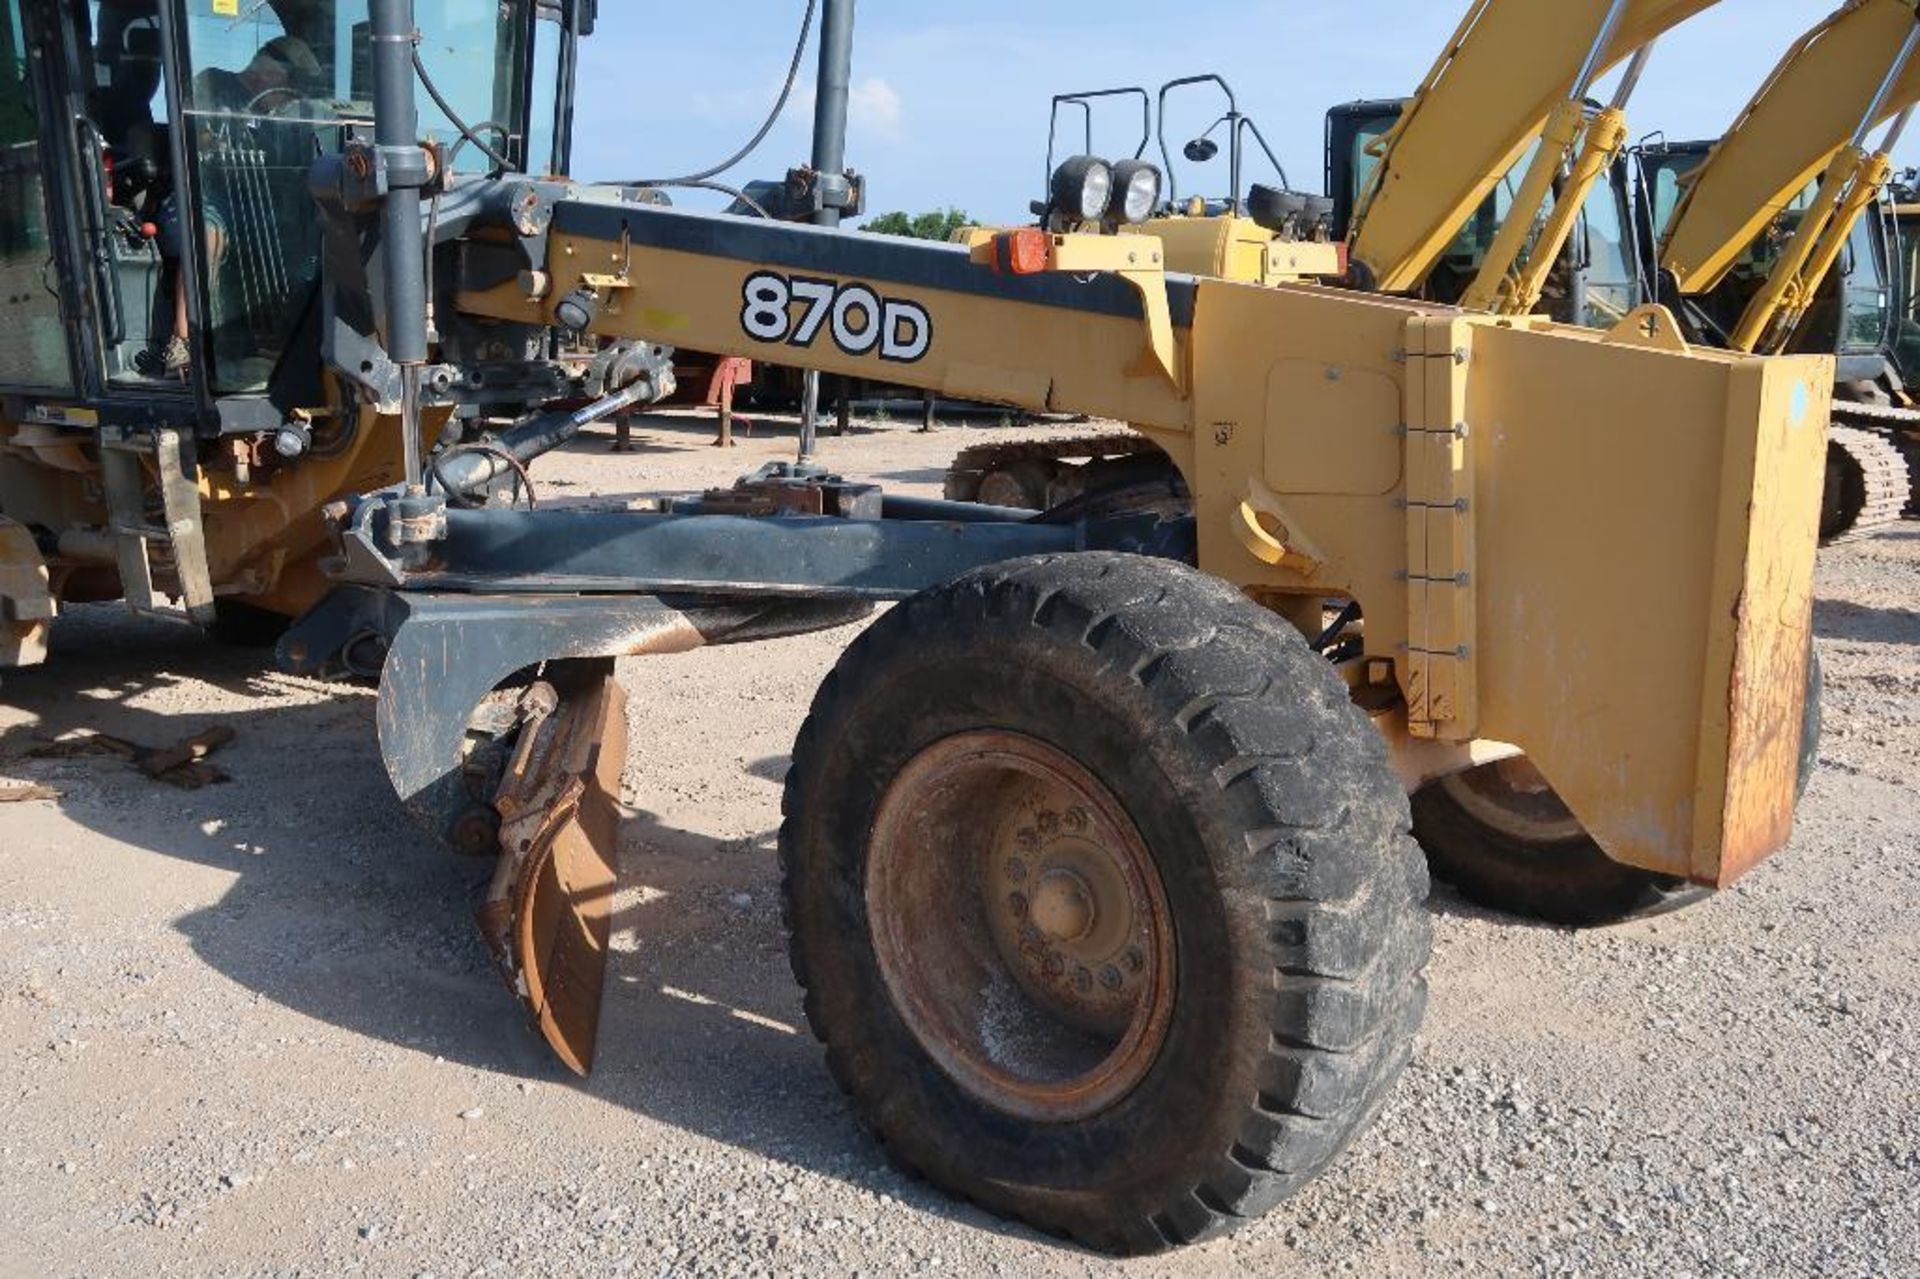 2007 John Deere Motor Grader Model 870D, S/N DW870DX611431, with Ripper (10,340 hours indicated) - Image 2 of 8